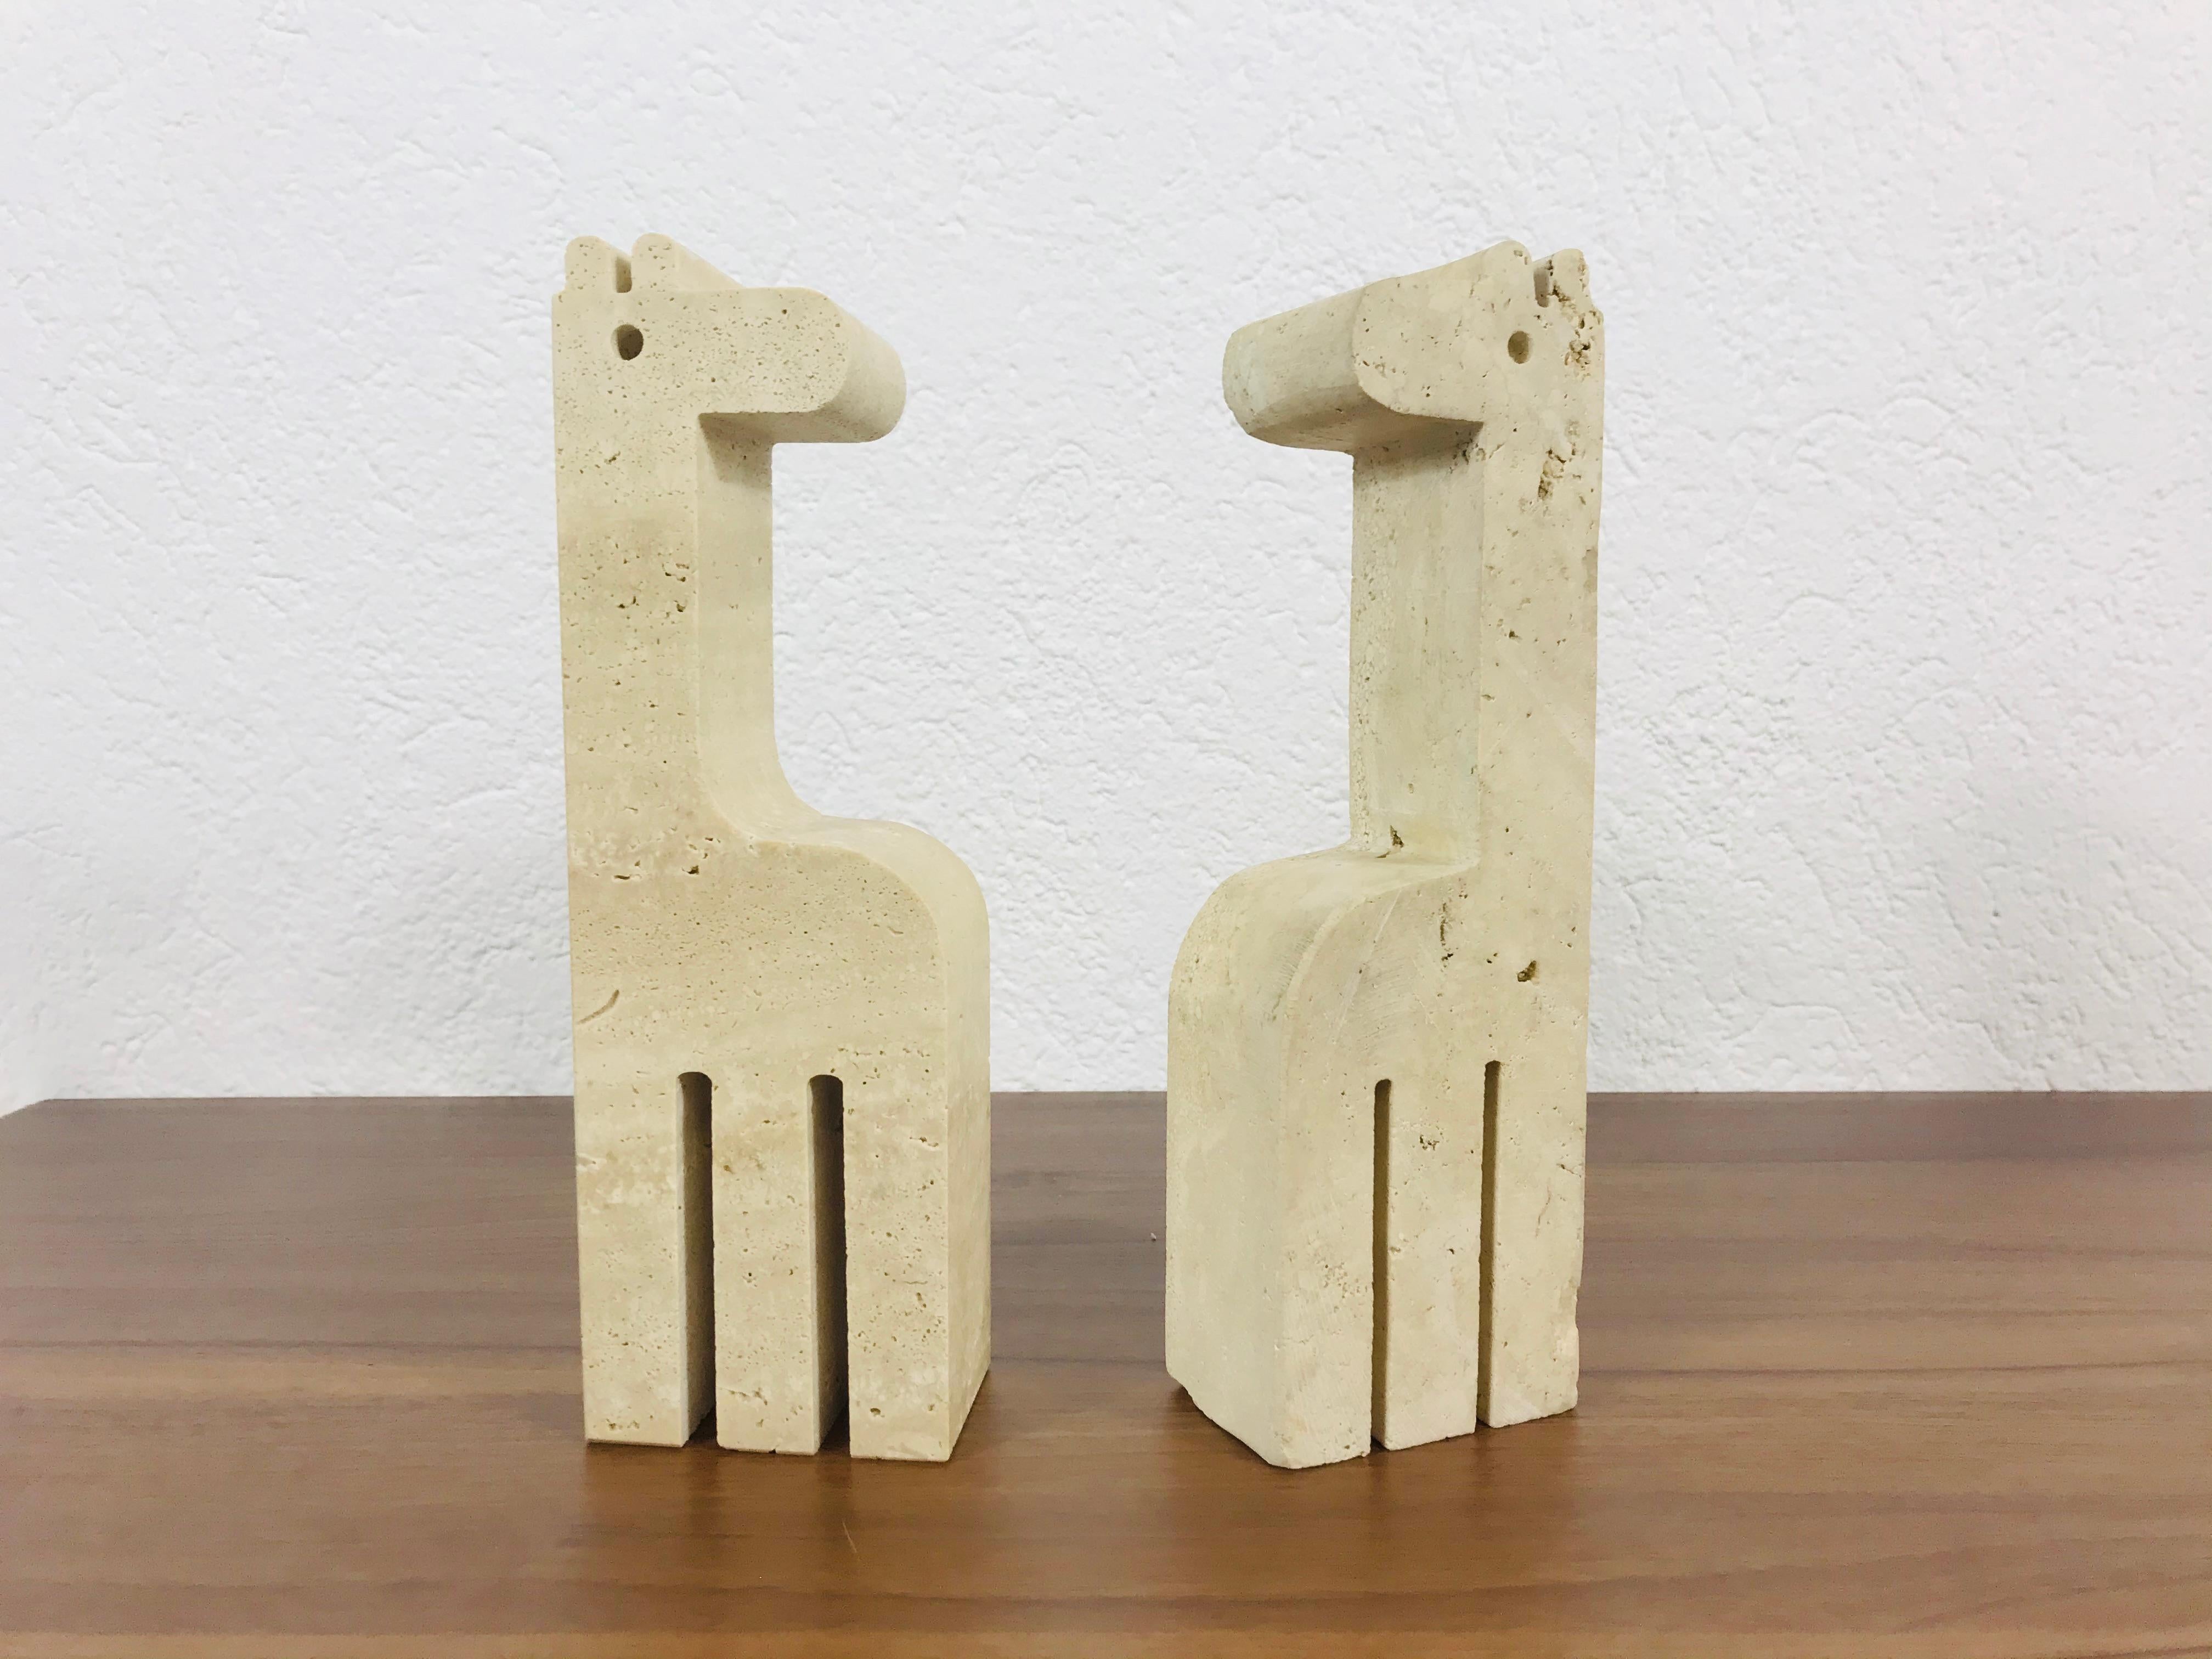 Wonderful pair of sculpture book ends by Fratelli Mannelli for Travertino di Rapolano. Giraffe shape travertine sculpture from the 1970s.